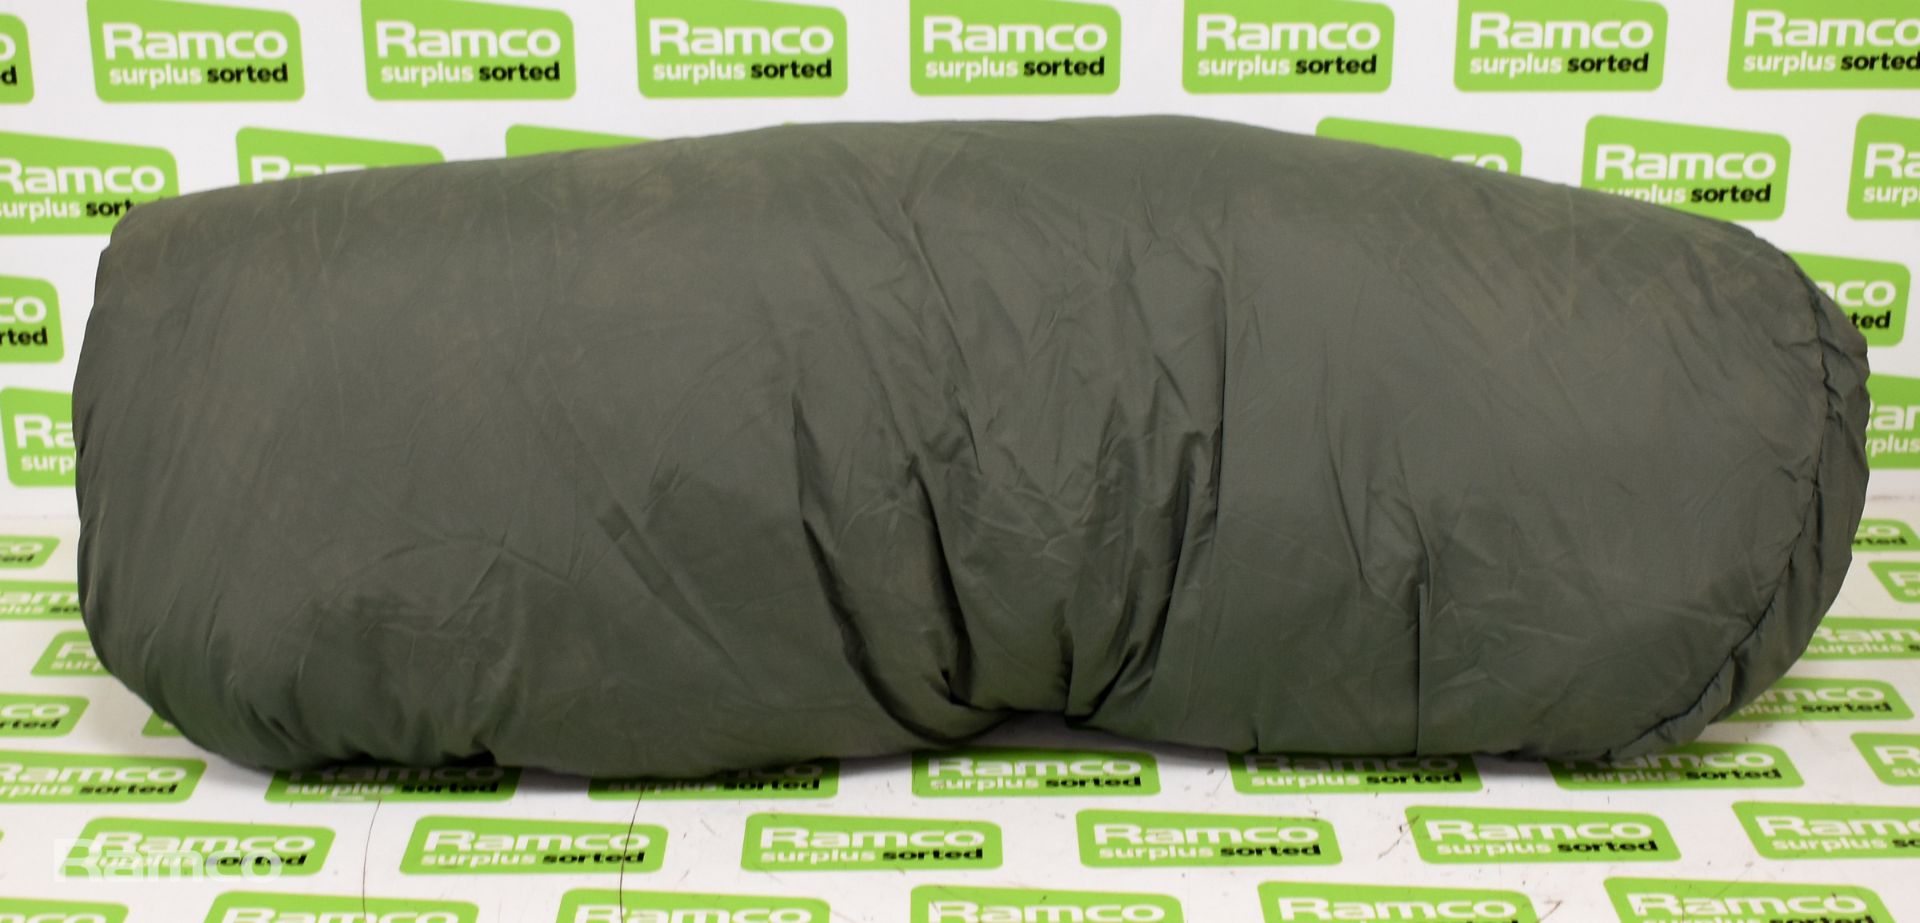 30x Sleeping bags - mixed grades and sizes - Image 10 of 10